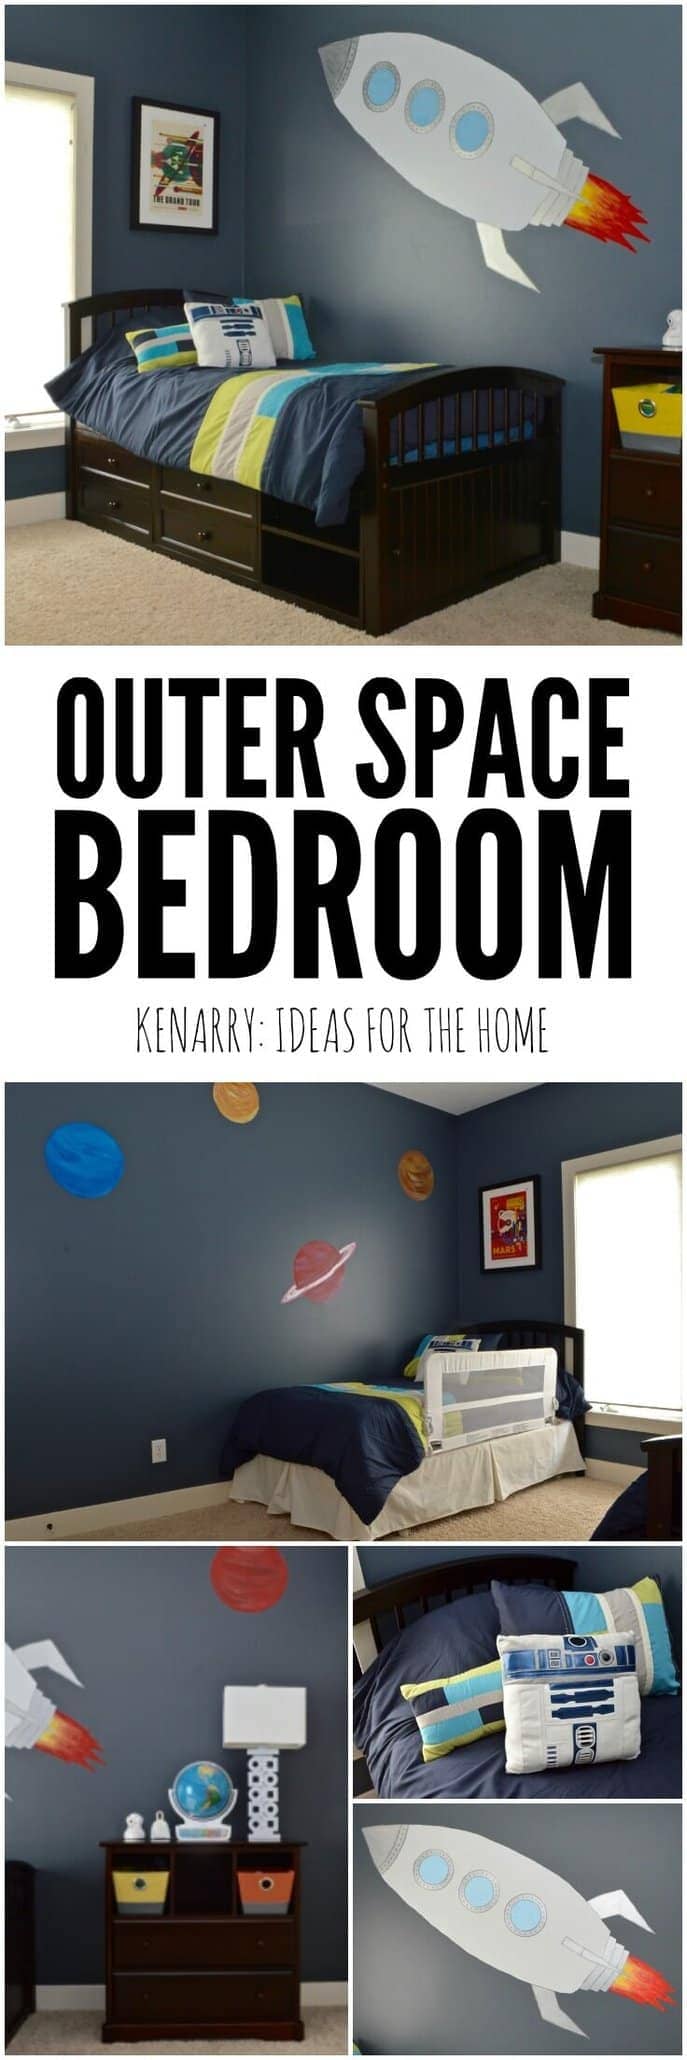 Your kids will be over the moon with an outer space boys bedroom. Check out the home decor, decorative wall mural and other details in this room reveal including a few NASA and Star Wars ideas. The whole room is out of this world!